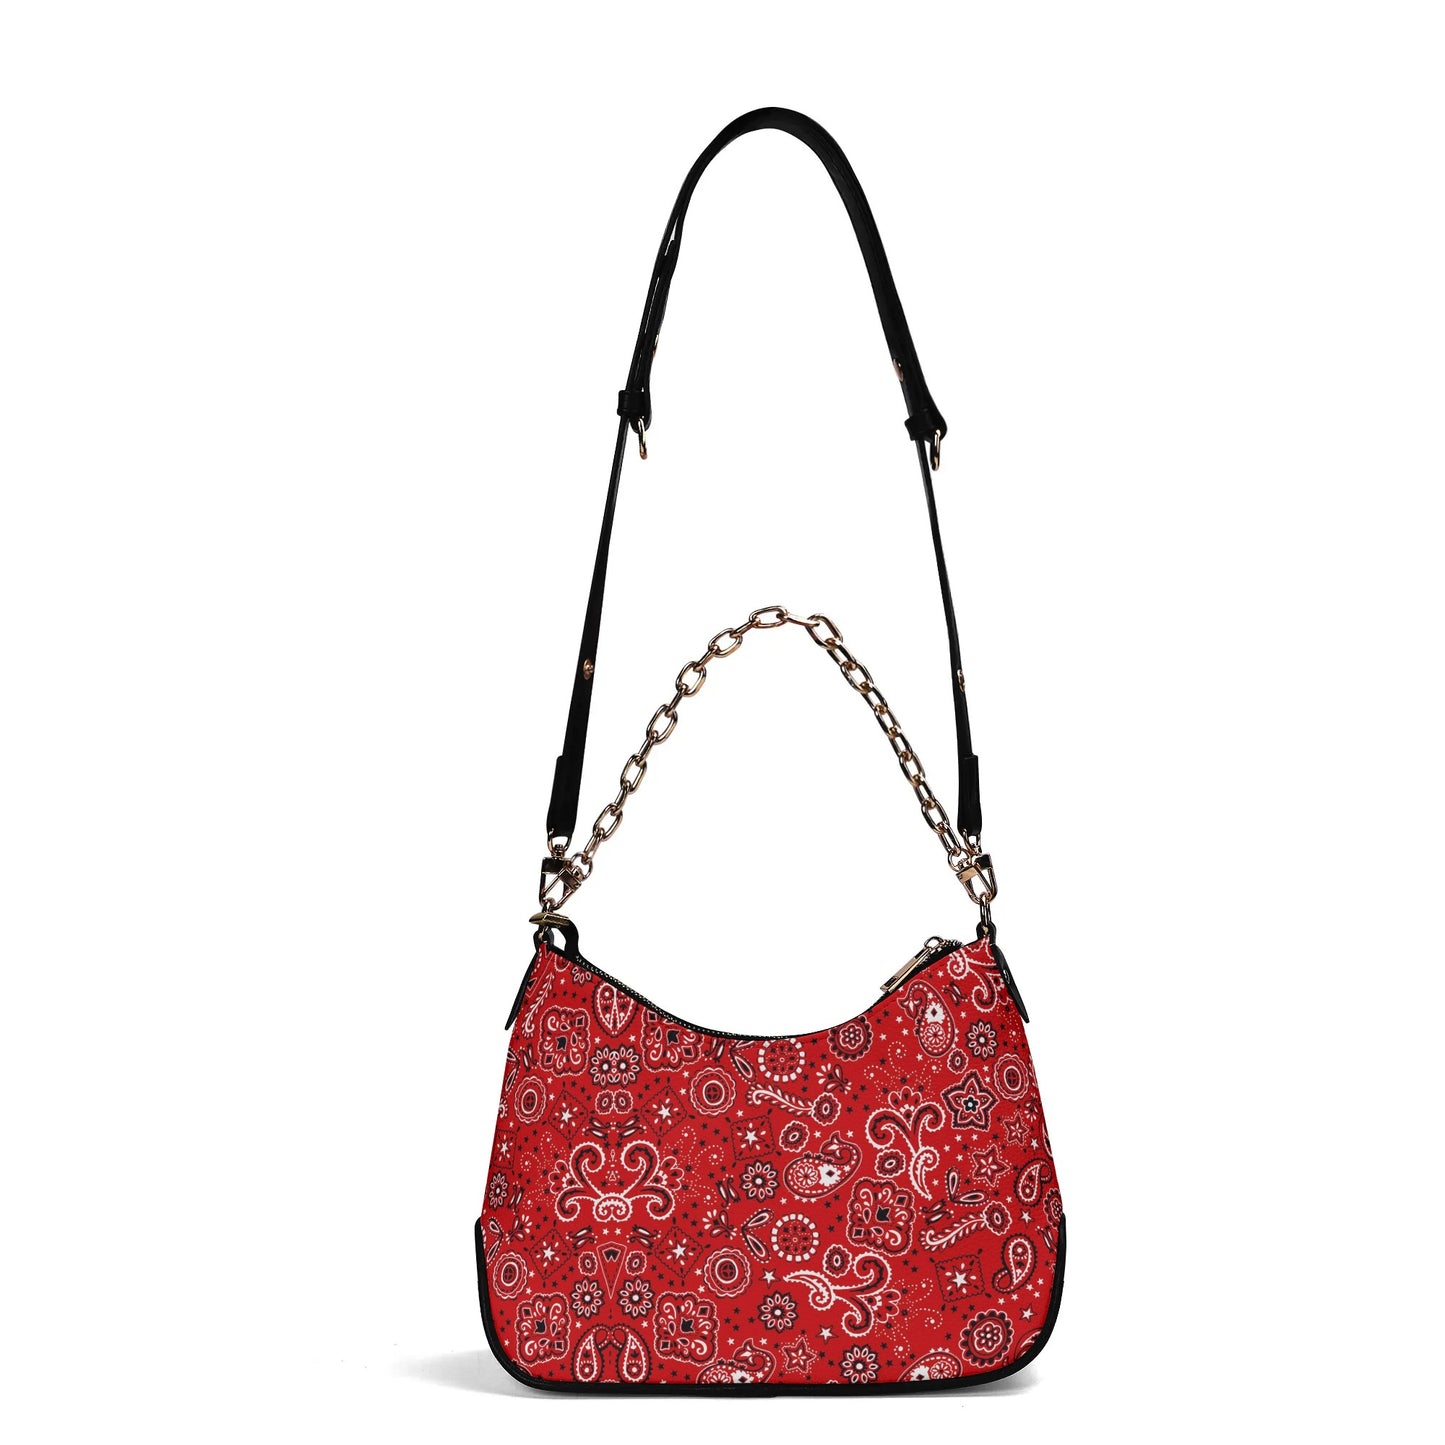 T4x Cross-body Red Scarf Pattern Bag with Chain Decoration